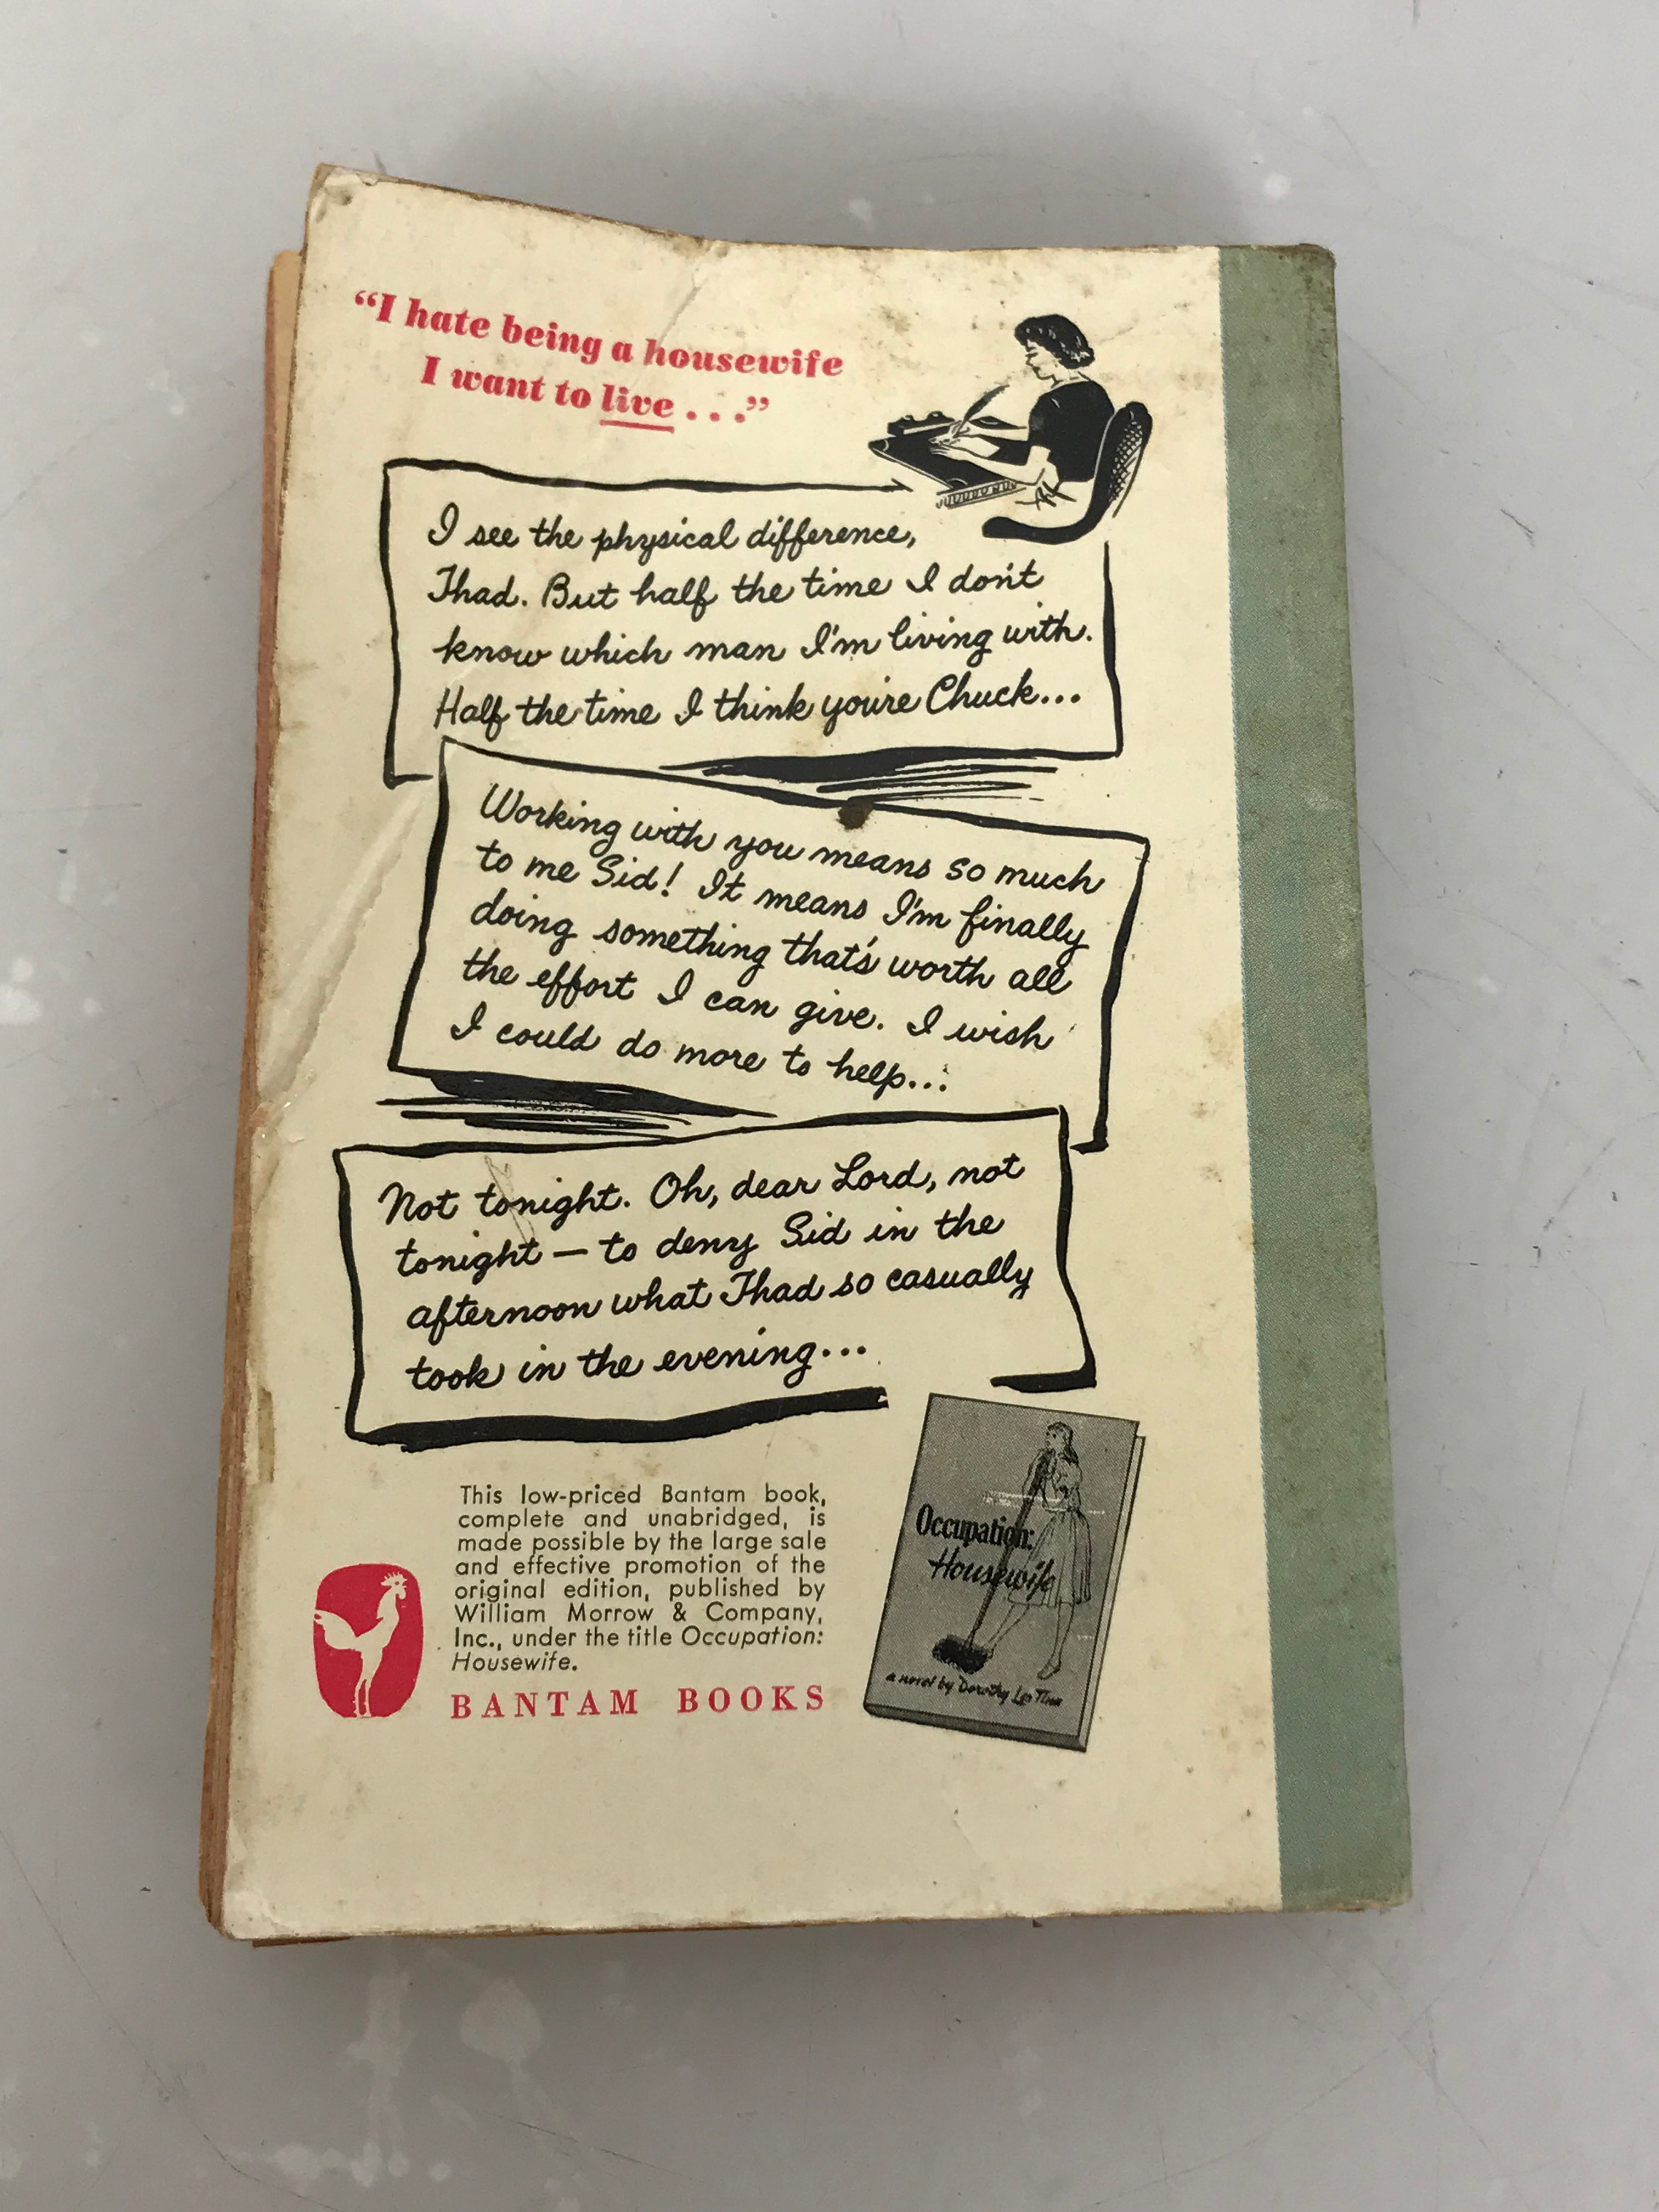 Confession The Story of an Uncertain Wife by Dorothy Les Tina Vintage SC 1949